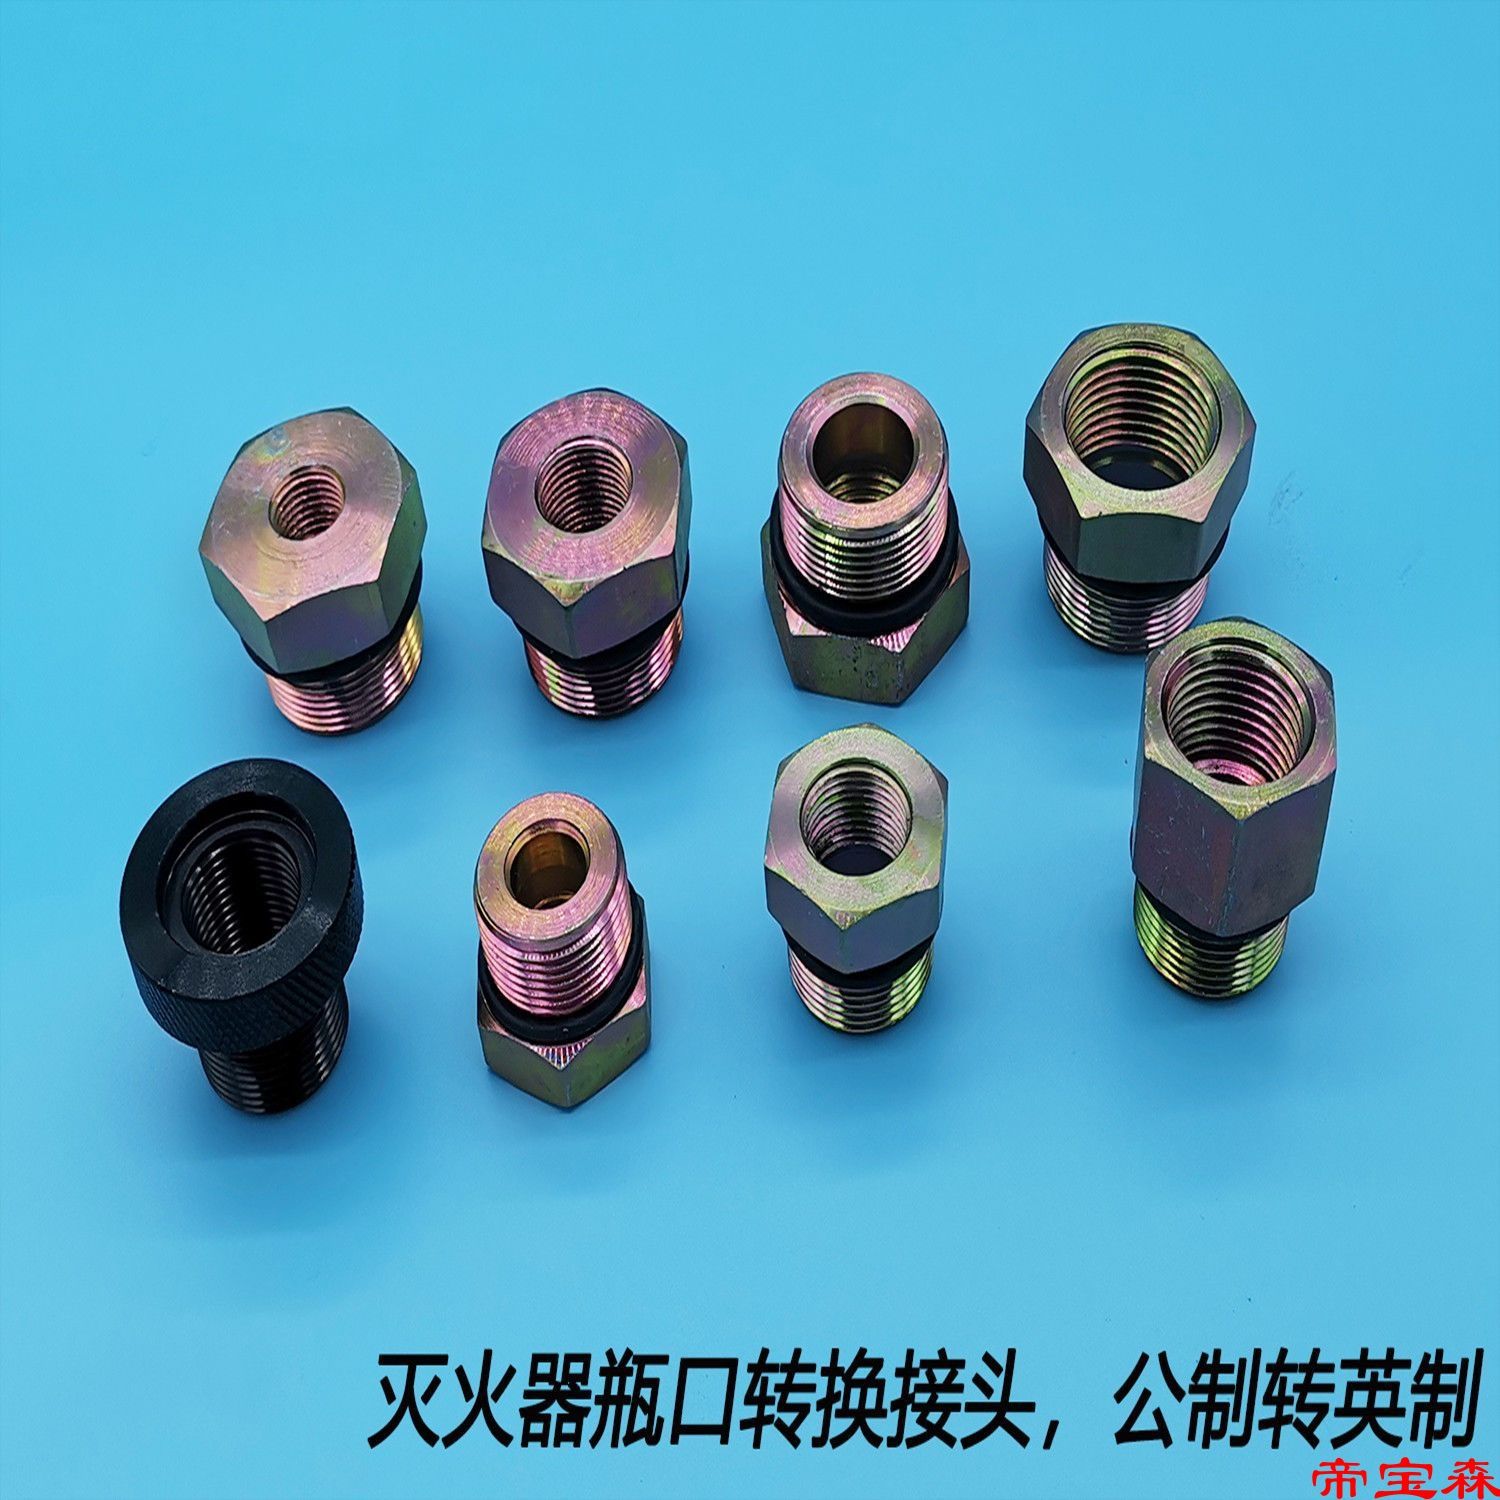 Fire Extinguisher Bottle transformation Joint Metric system Inch Screw 2 points -6 Exceptionally Thread Cylinders Plug